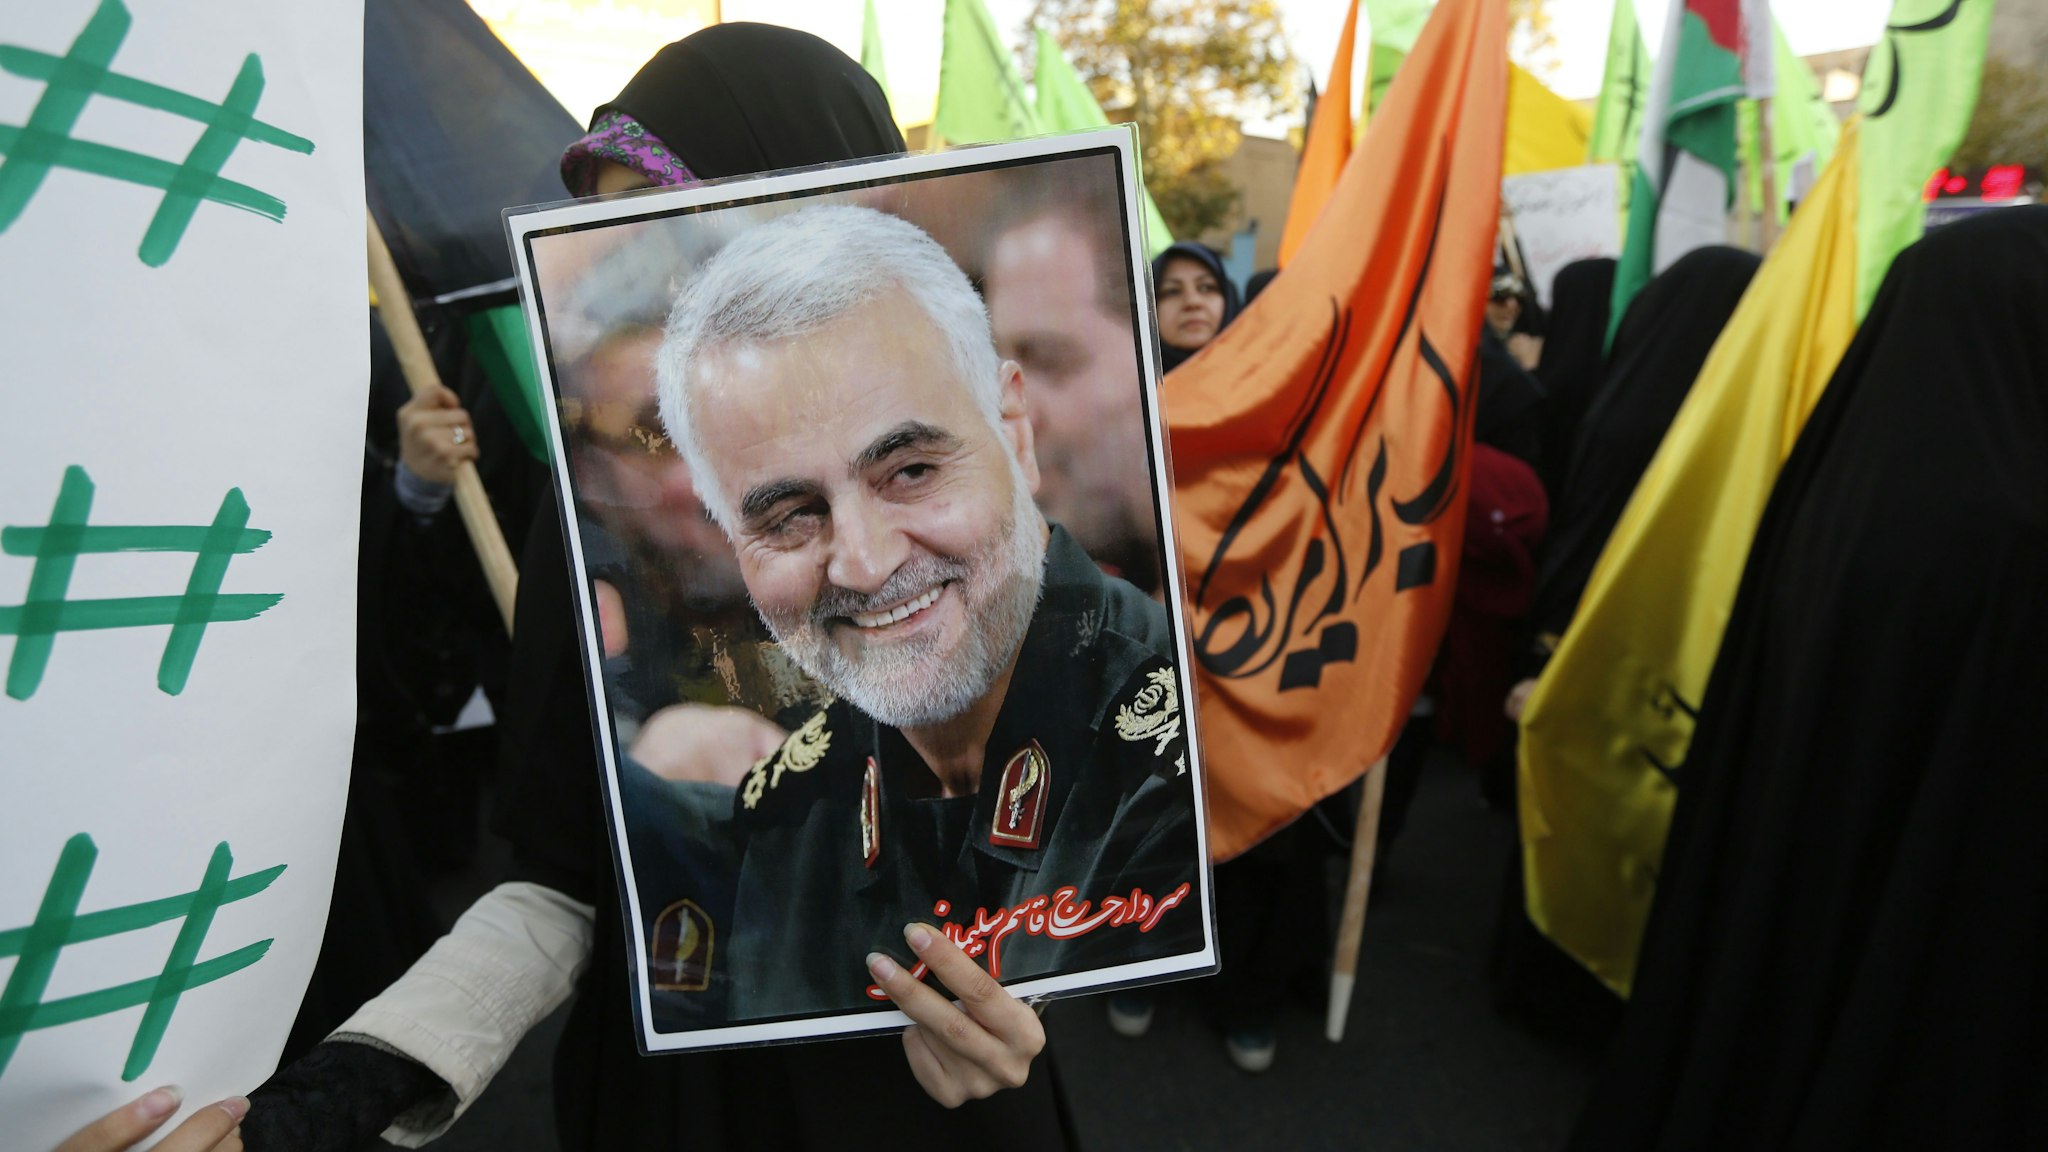 Iranian protesters hold a portrait of the commander of the Iranian Revolutionary Guard's Quds Force, Gen. Qassem Soleimani, during a demonstration in the capital Tehran on December 11, 2017, to denounce US President Donald Trump's declaration of Jerusalem as Israel's capital. (Photo by ATTA KENARE / AFP) (Photo by ATTA KENARE/AFP via Getty Images)